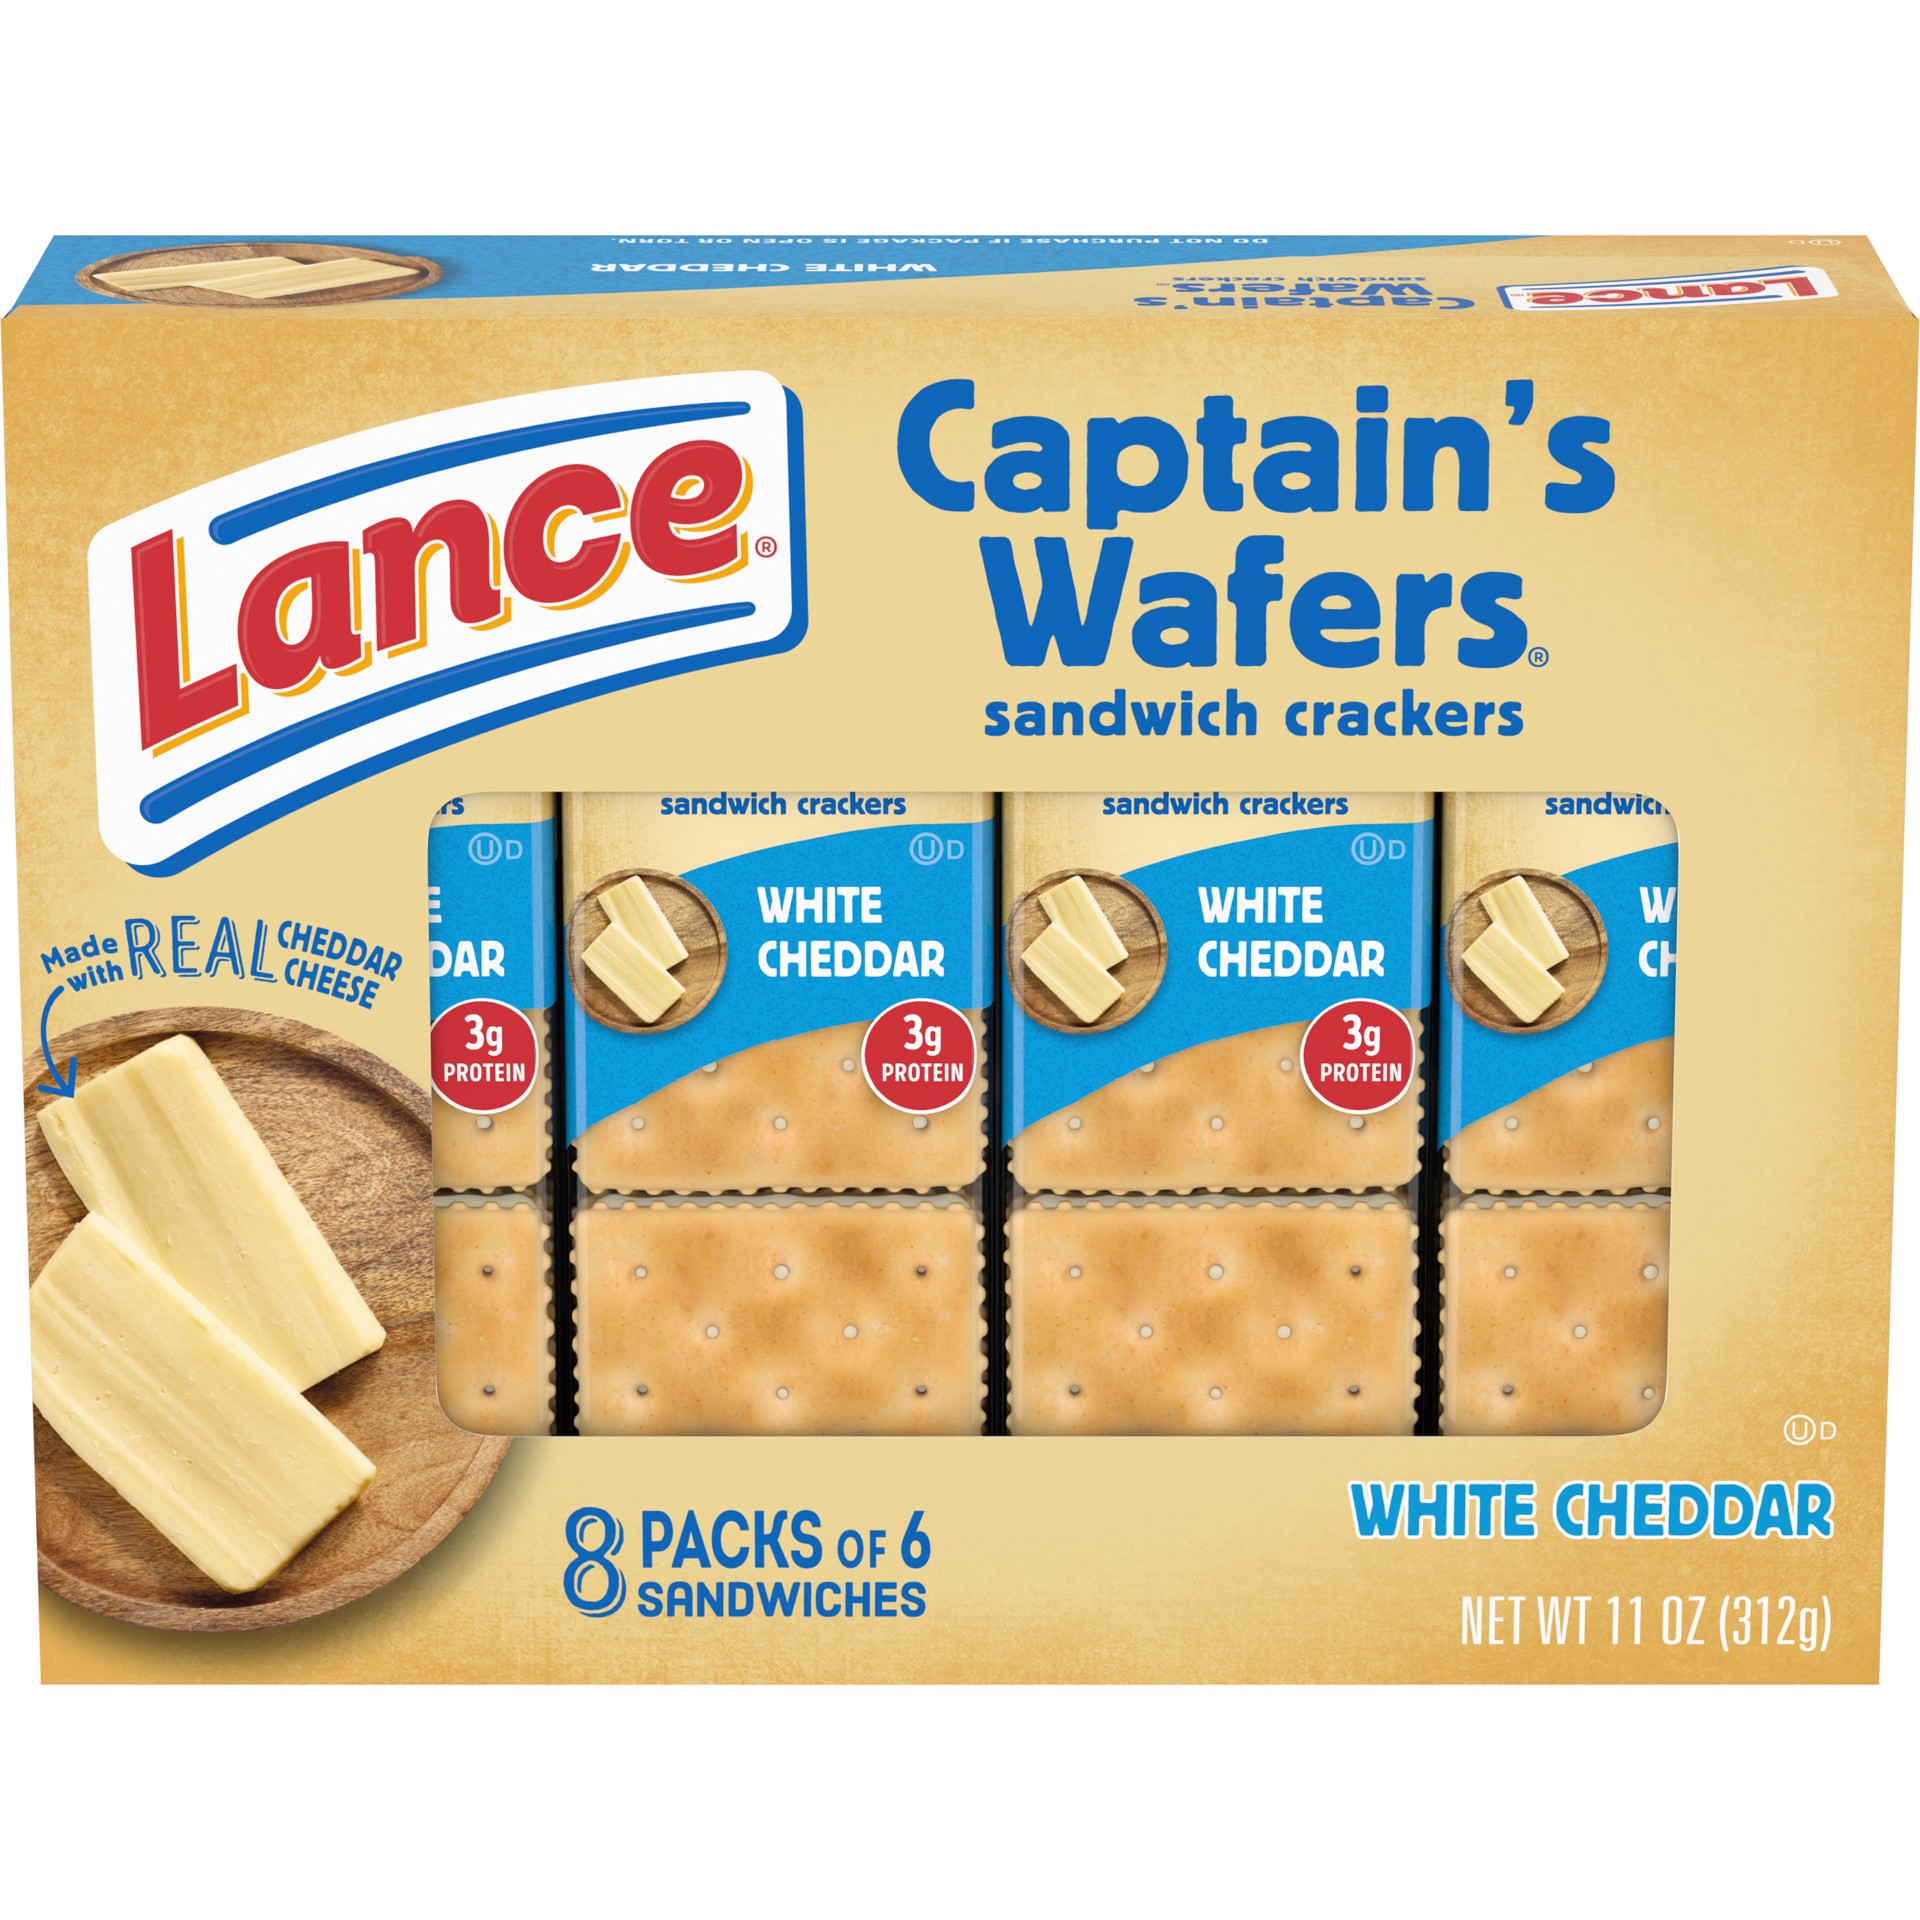 slide 1 of 5, Lance Sandwich Crackers, Captain's Wafers White Cheddar, 8 Individual Packs, 6 Sandwiches Each, 11 oz